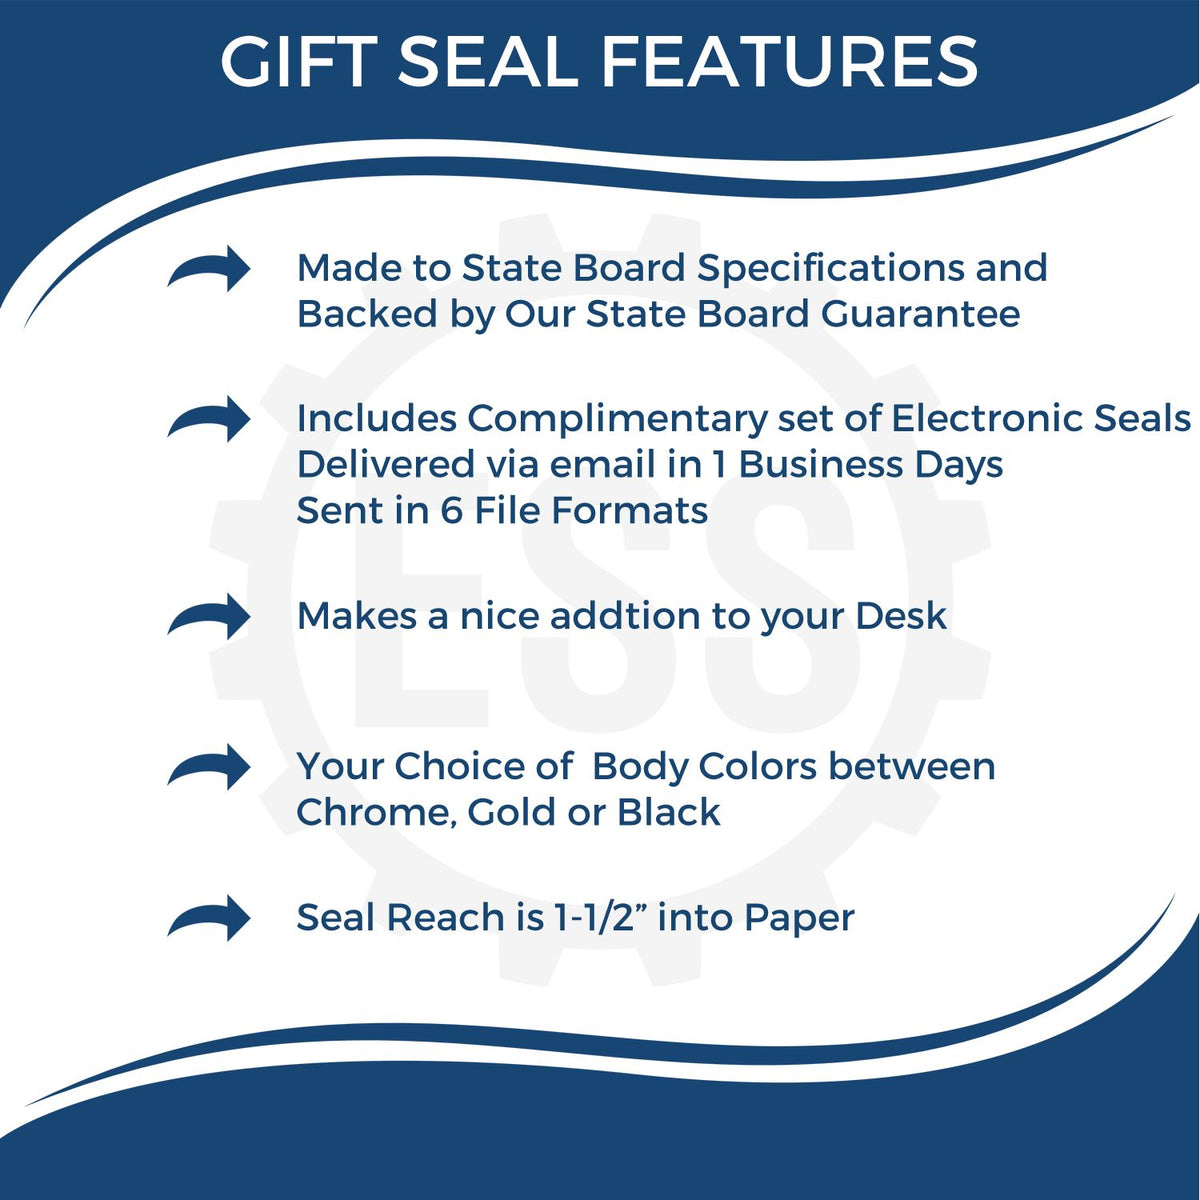 A picture of an infographic highlighting the selling points for the Gift Guam Engineer Seal